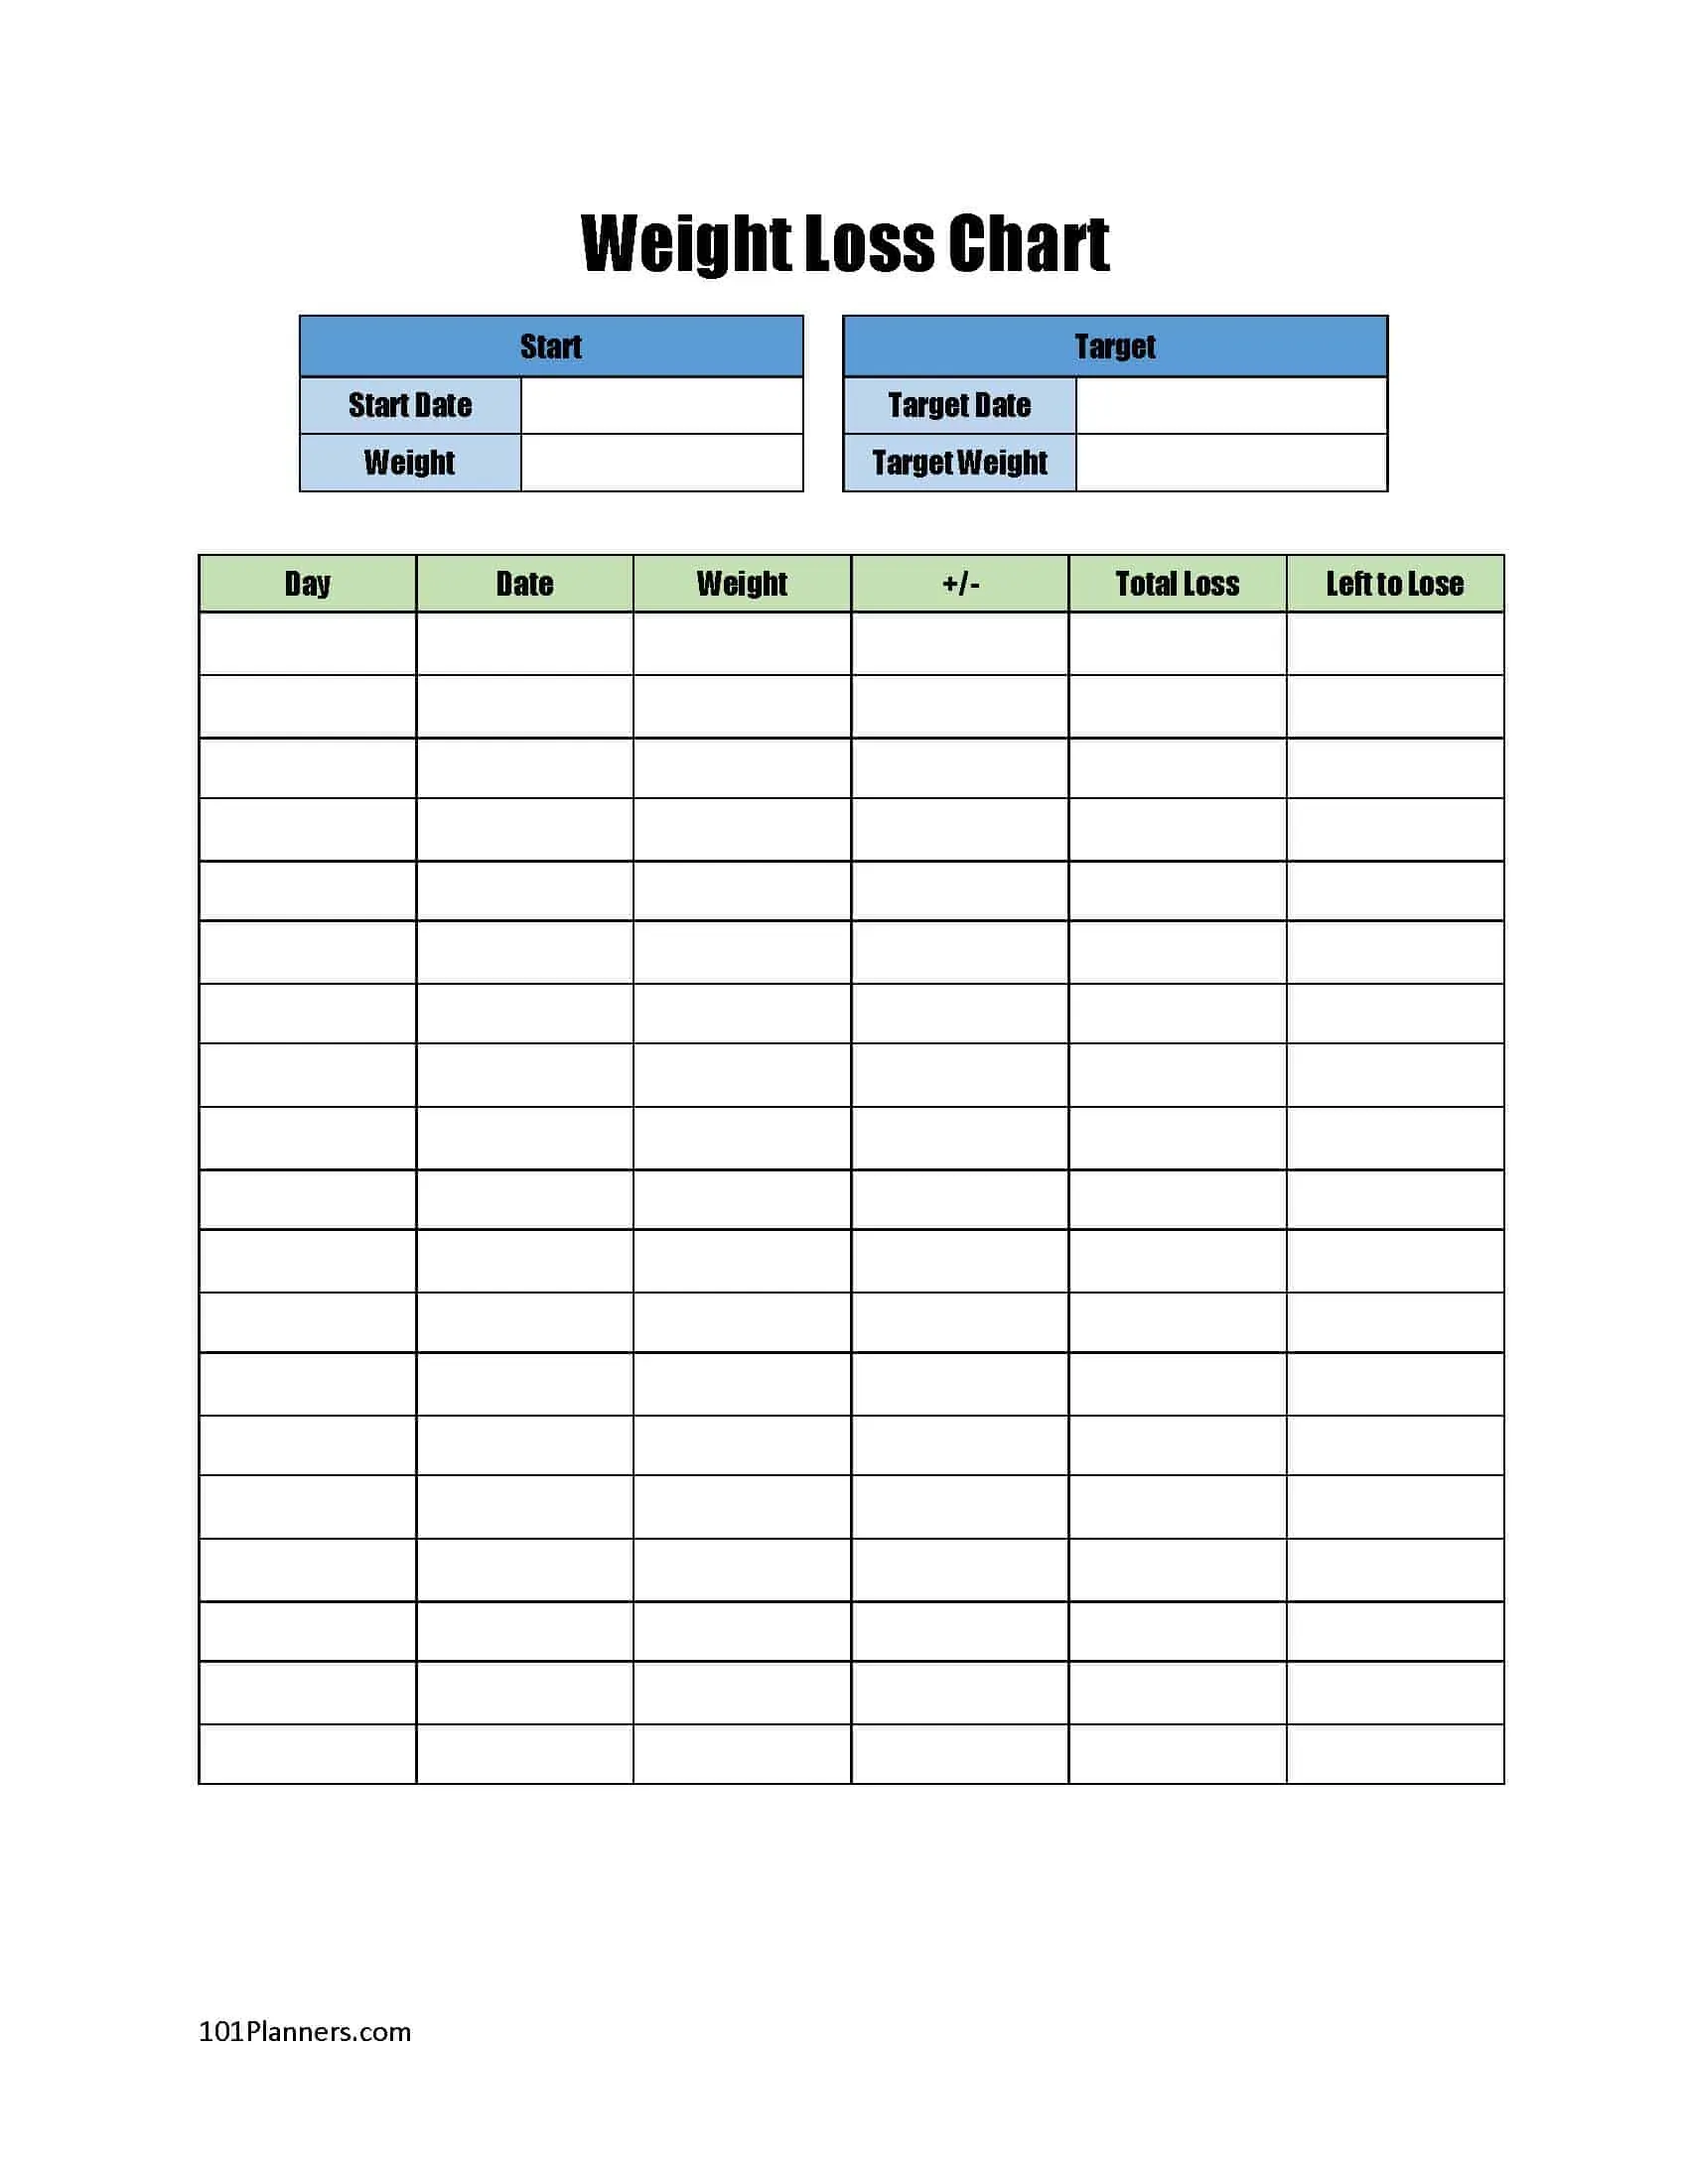 Weight Tracker Printable Weight Loss Log Health Journey Fitness Recorder  Weight Loss Sheet PDF A4 A5 Letter 